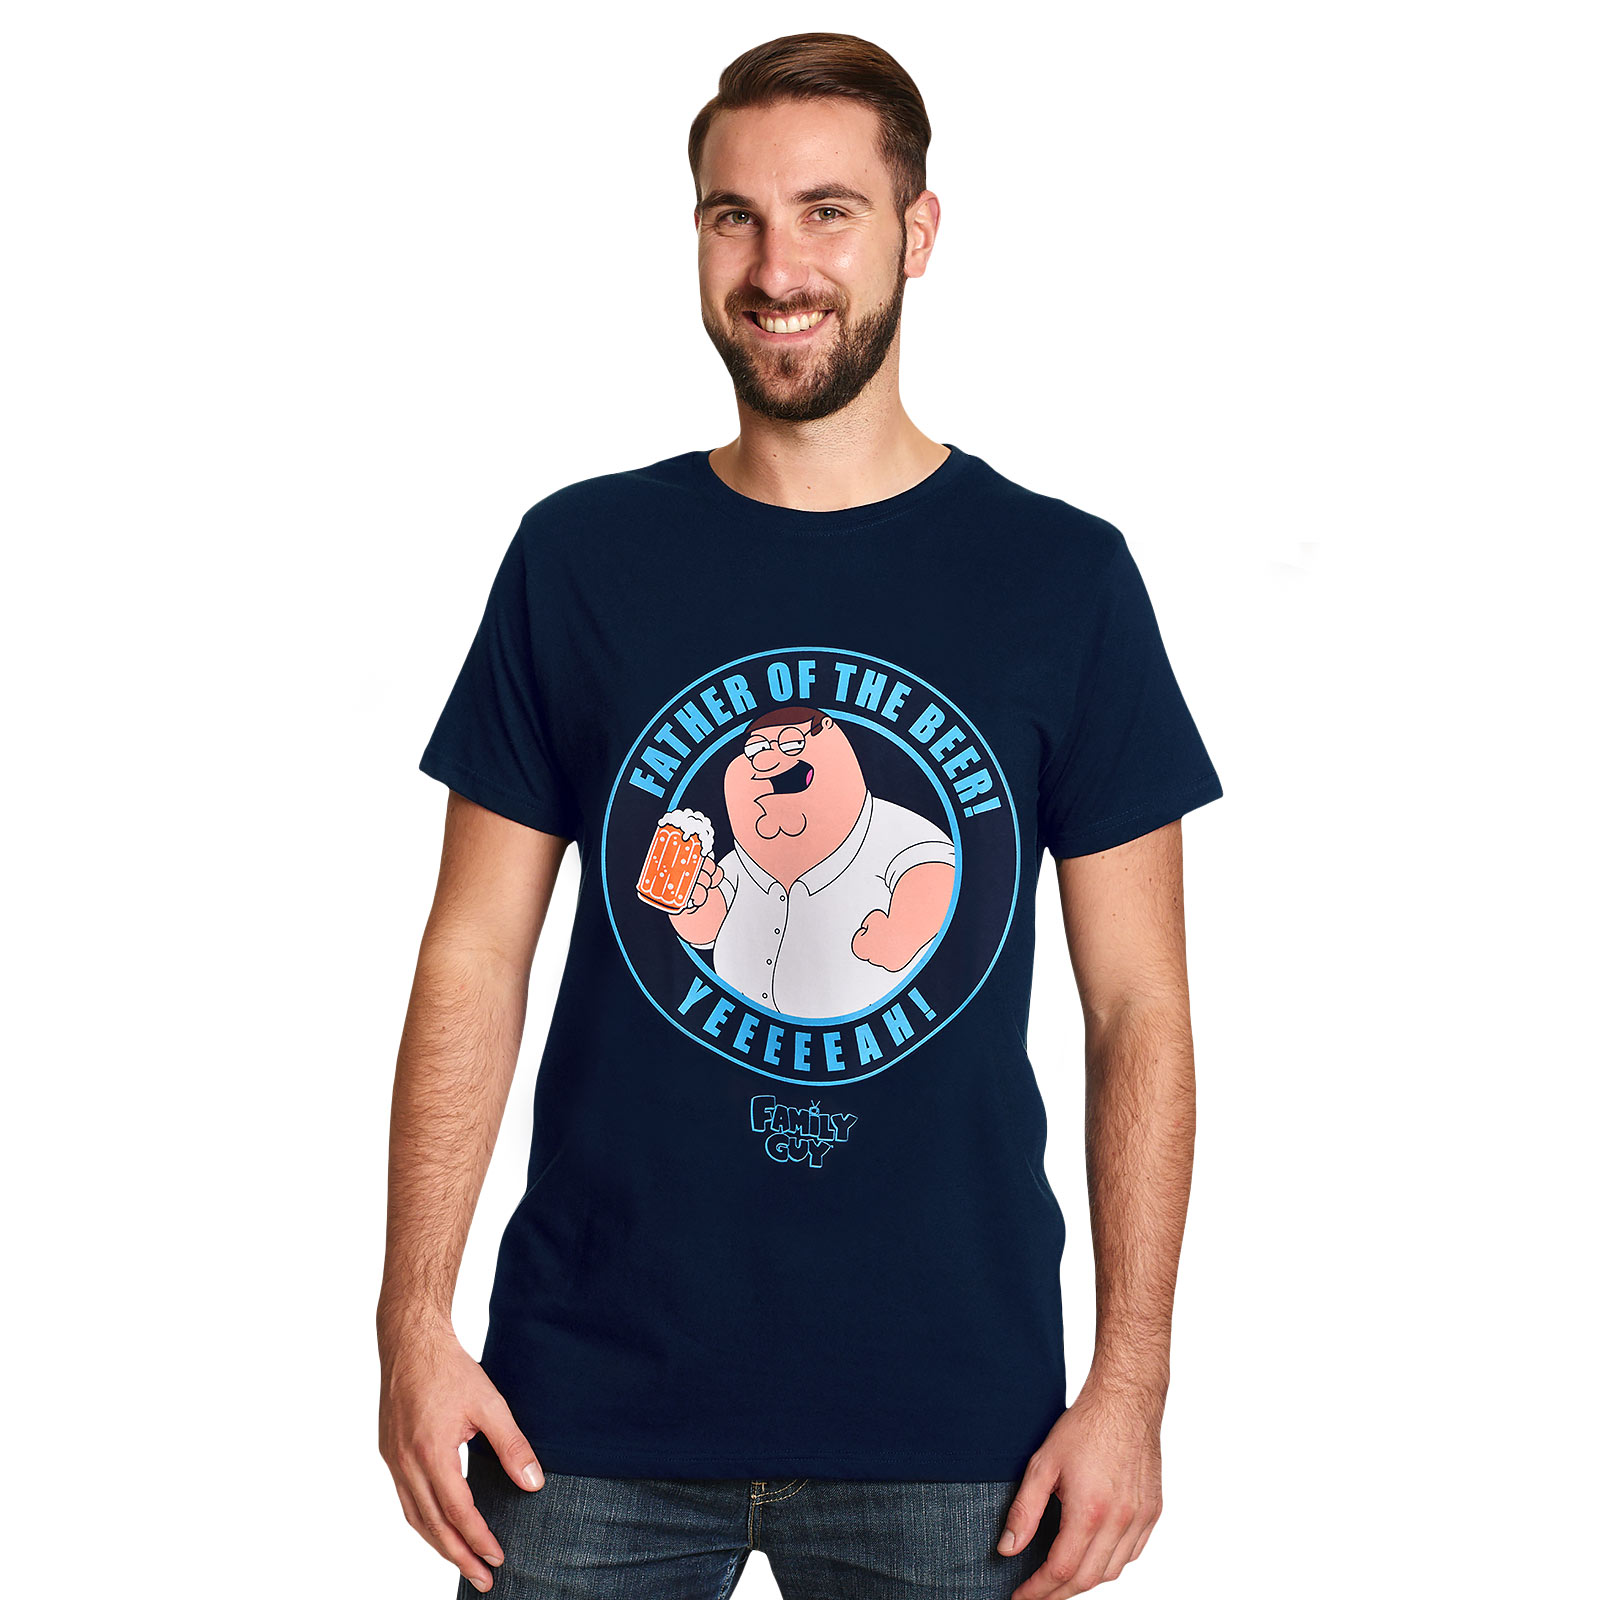 Family Guy - T-shirt Father of the Beer bleu